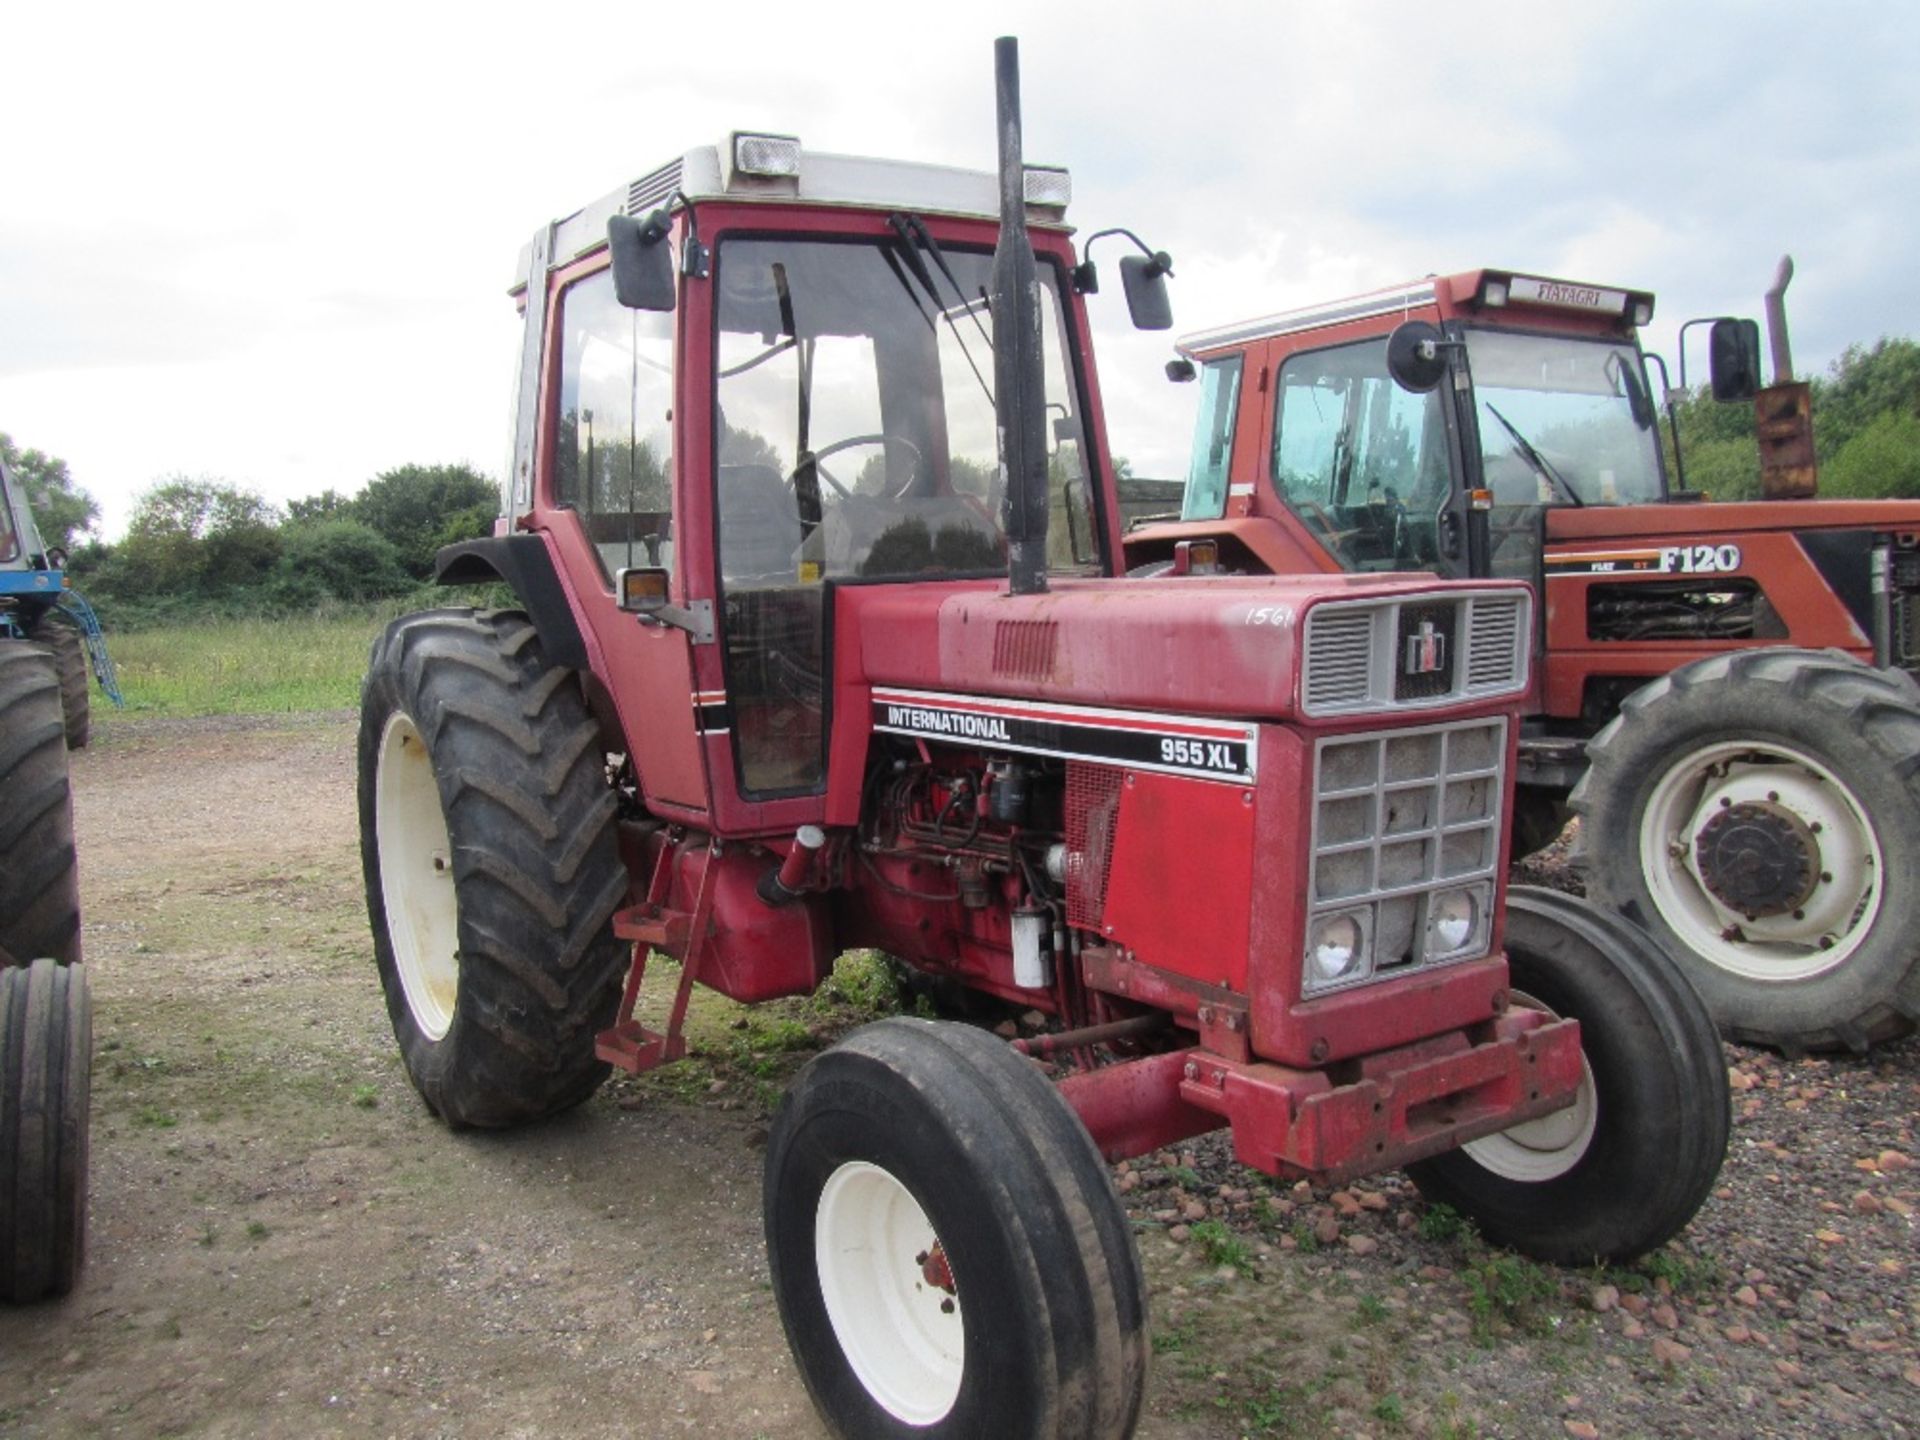 International 955XL 2wd Tractor. V5 will be supplied. Reg. No. ERP 957X Ser. No. 001289 - Image 3 of 4